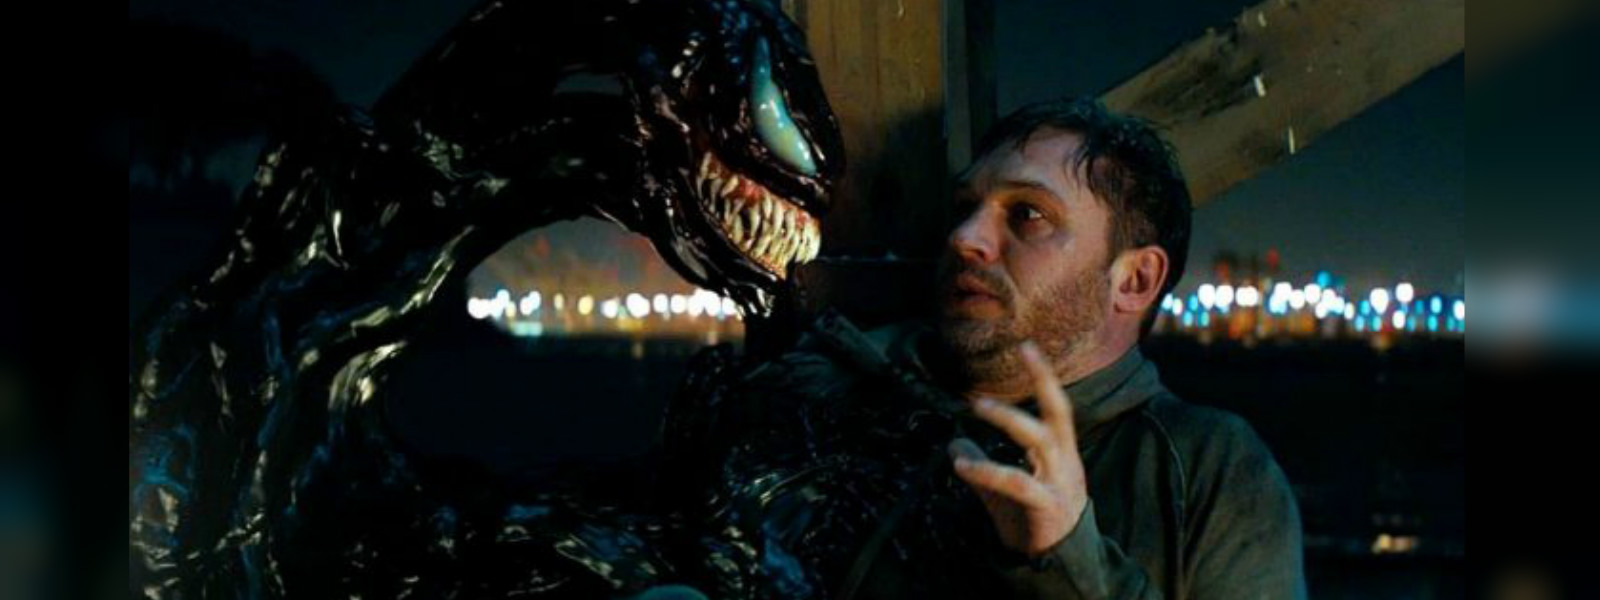 Venom to infect US Box office with $68.5 mn